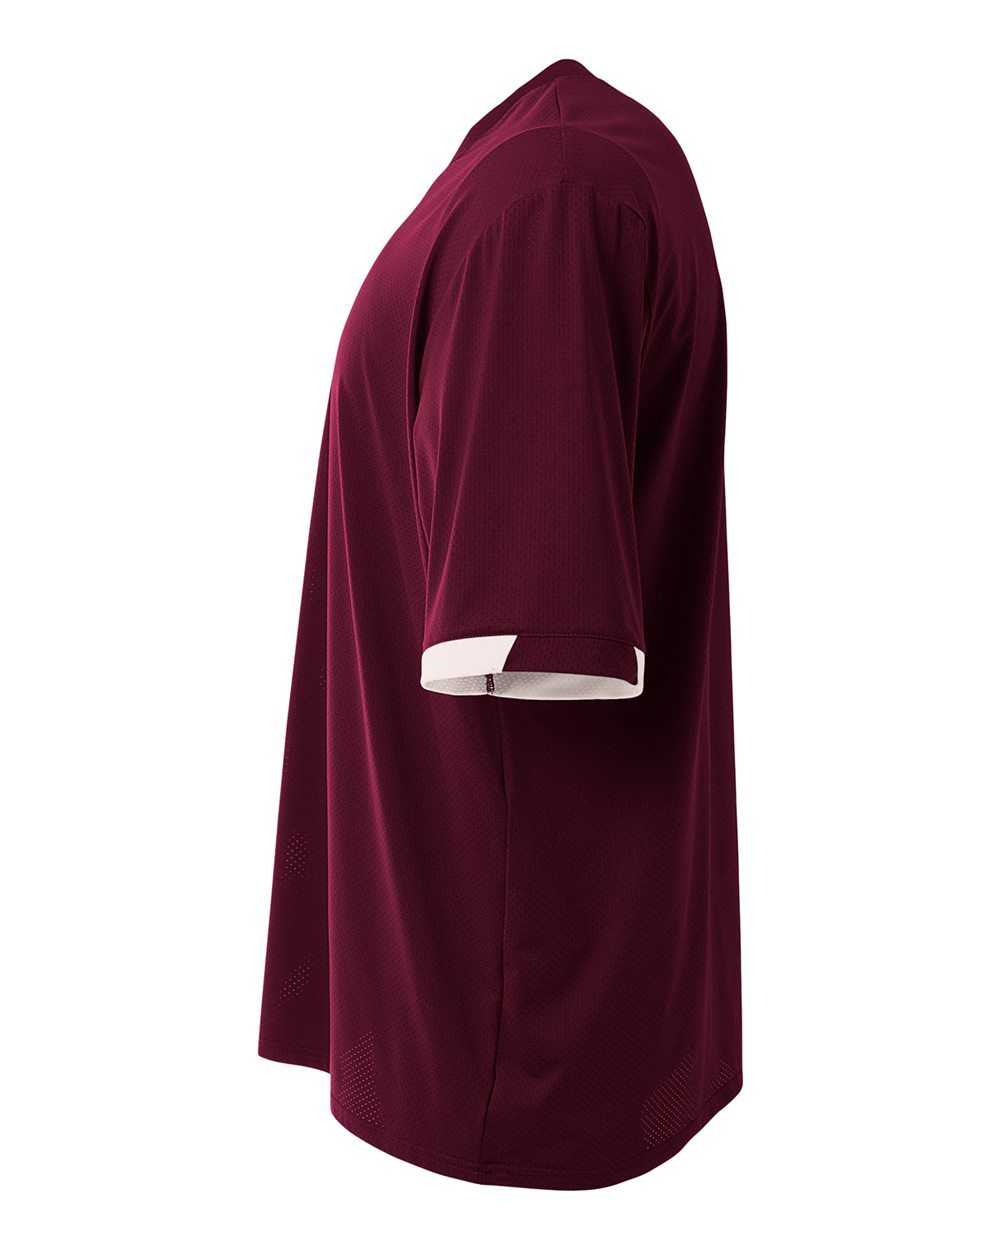 A4 N3011 The Stretch Pro - Mesh Baseball Jersey - Maroon White - HIT a Double